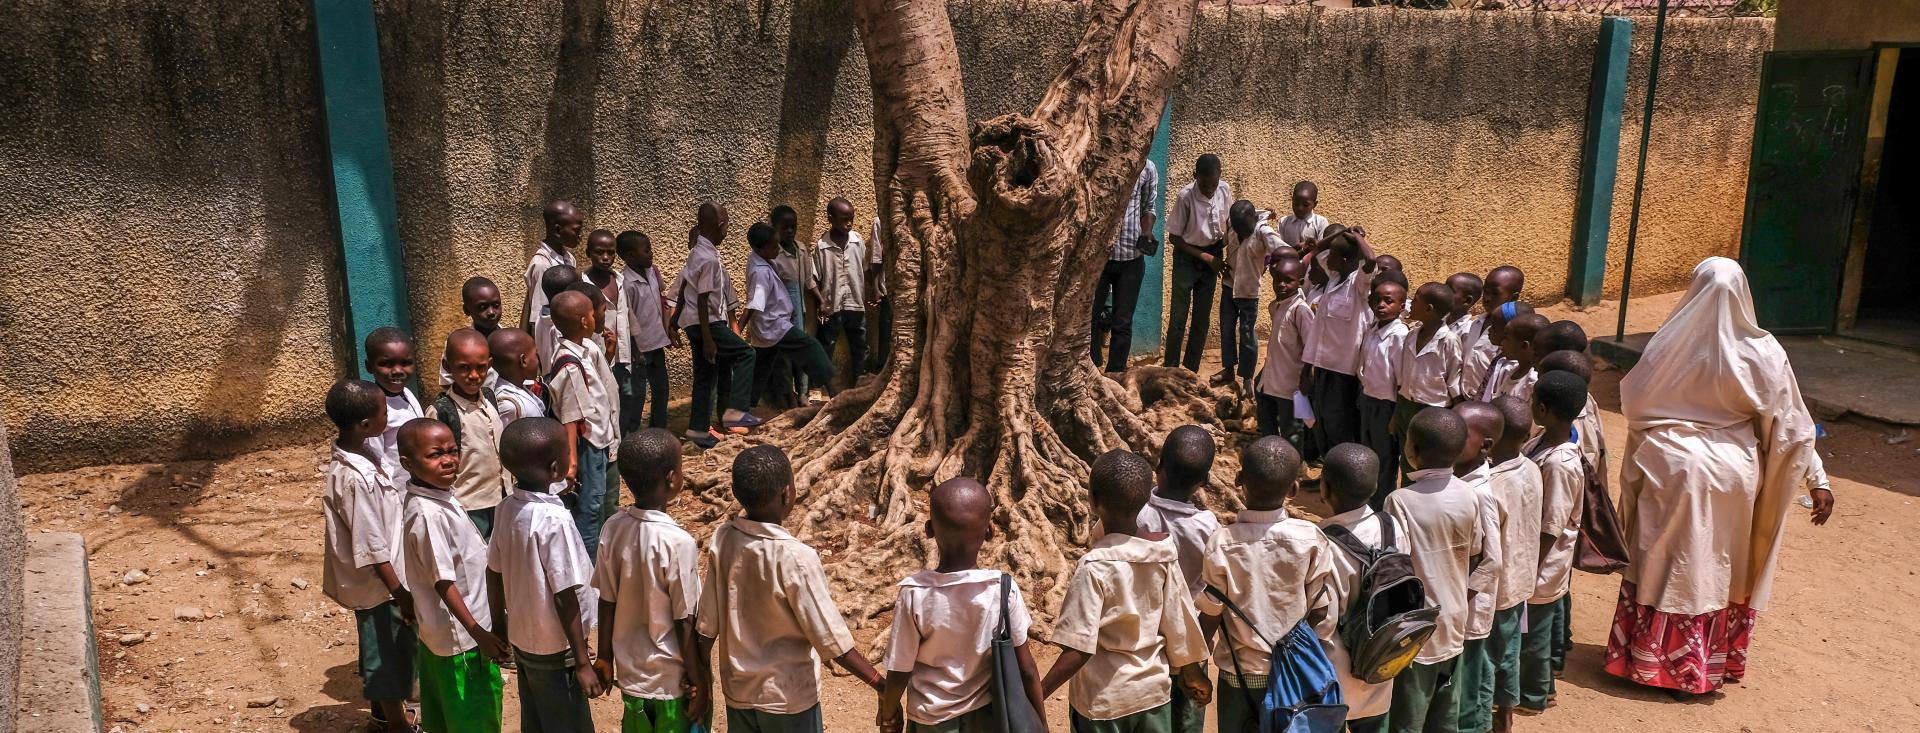 A group of young students are standing outside in a circle, holding hands, around a tree. Some are wearing backpacks or holding their bags in their hands. Their teacher is walking around them on the outside of the circle.